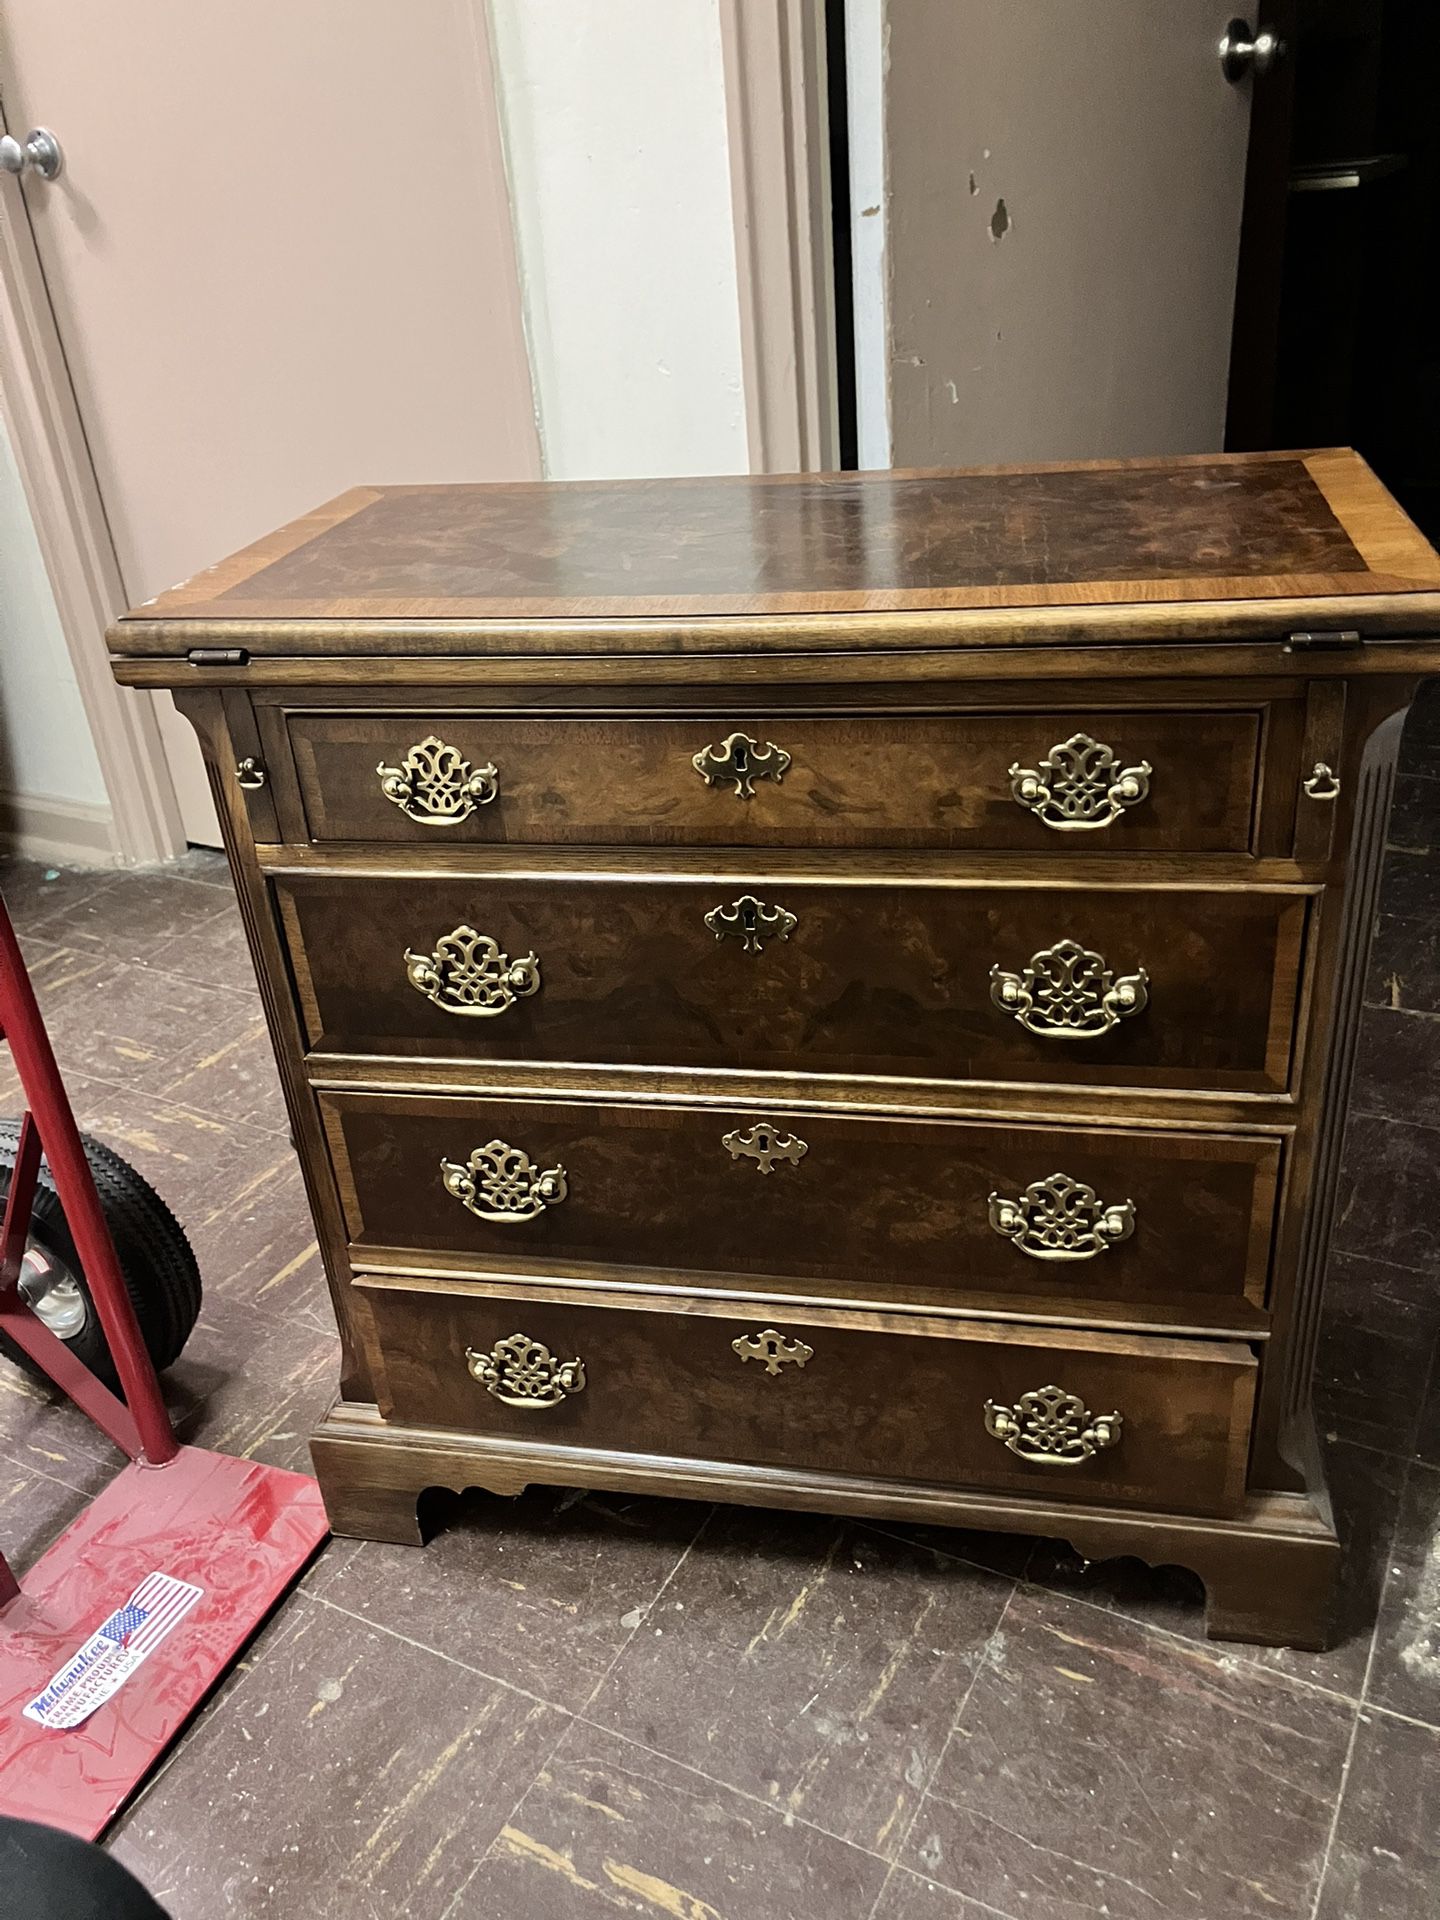 A Vintage Dresser With A Foldable Table Top